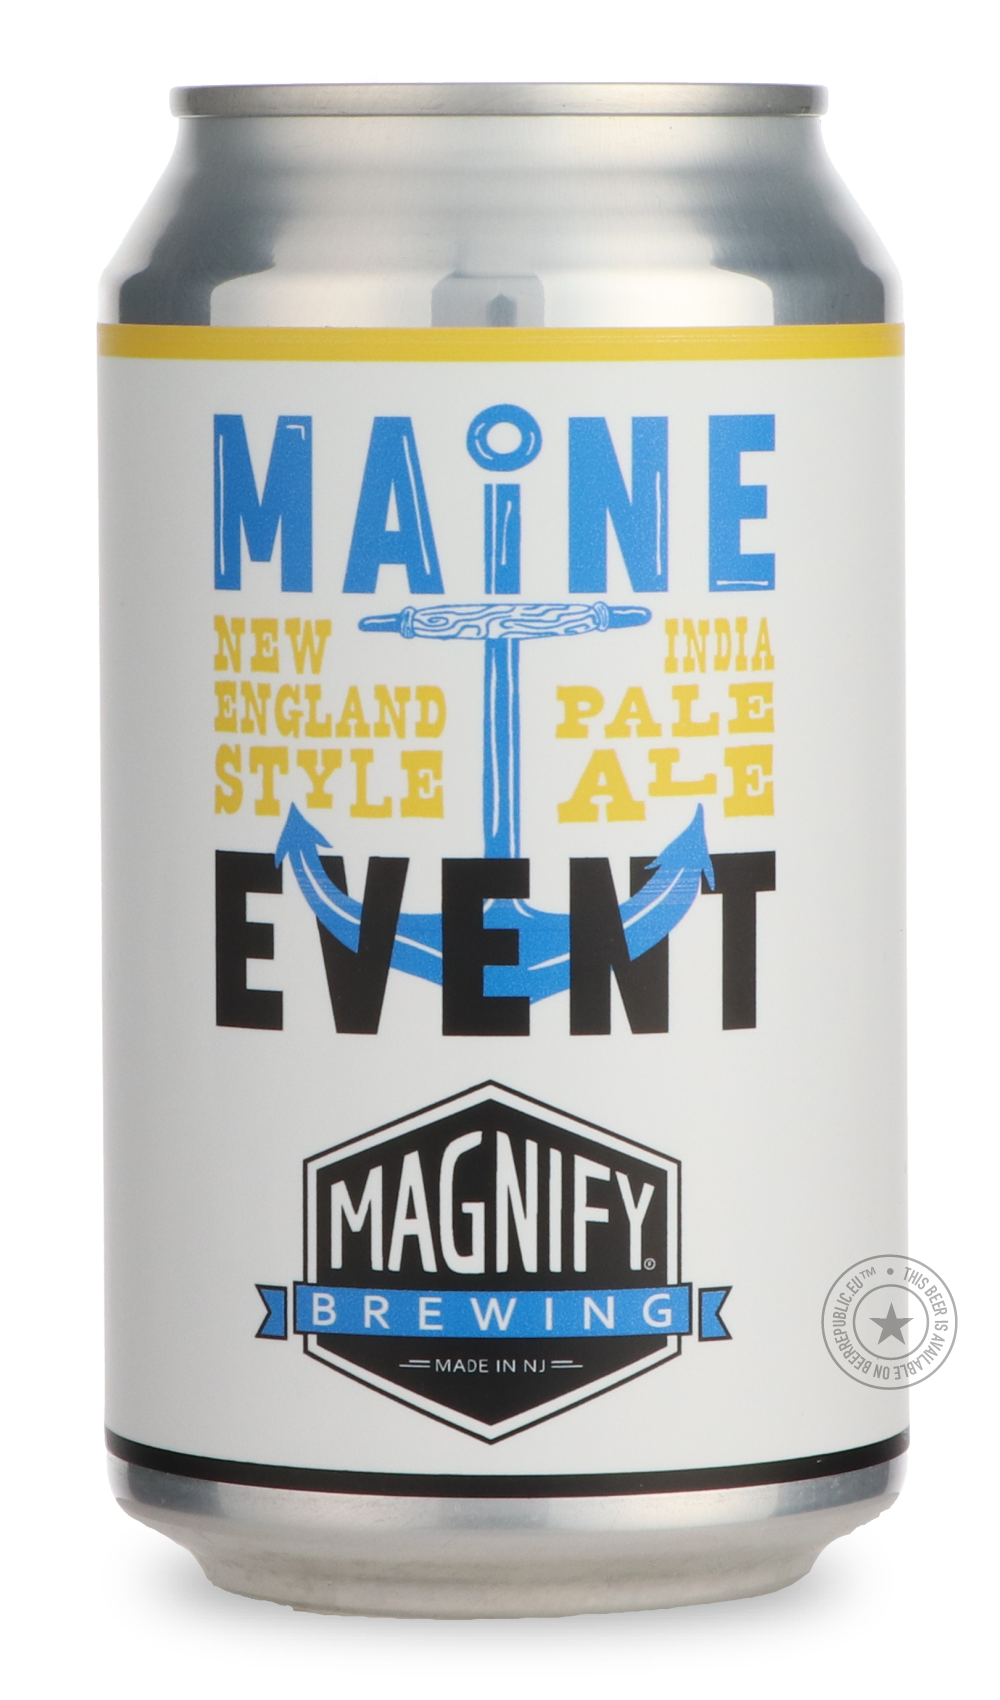 -Magnify- Maine Event-IPA- Only @ Beer Republic - The best online beer store for American & Canadian craft beer - Buy beer online from the USA and Canada - Bier online kopen - Amerikaans bier kopen - Craft beer store - Craft beer kopen - Amerikanisch bier kaufen - Bier online kaufen - Acheter biere online - IPA - Stout - Porter - New England IPA - Hazy IPA - Imperial Stout - Barrel Aged - Barrel Aged Imperial Stout - Brown - Dark beer - Blond - Blonde - Pilsner - Lager - Wheat - Weizen - Amber - Barley Wine